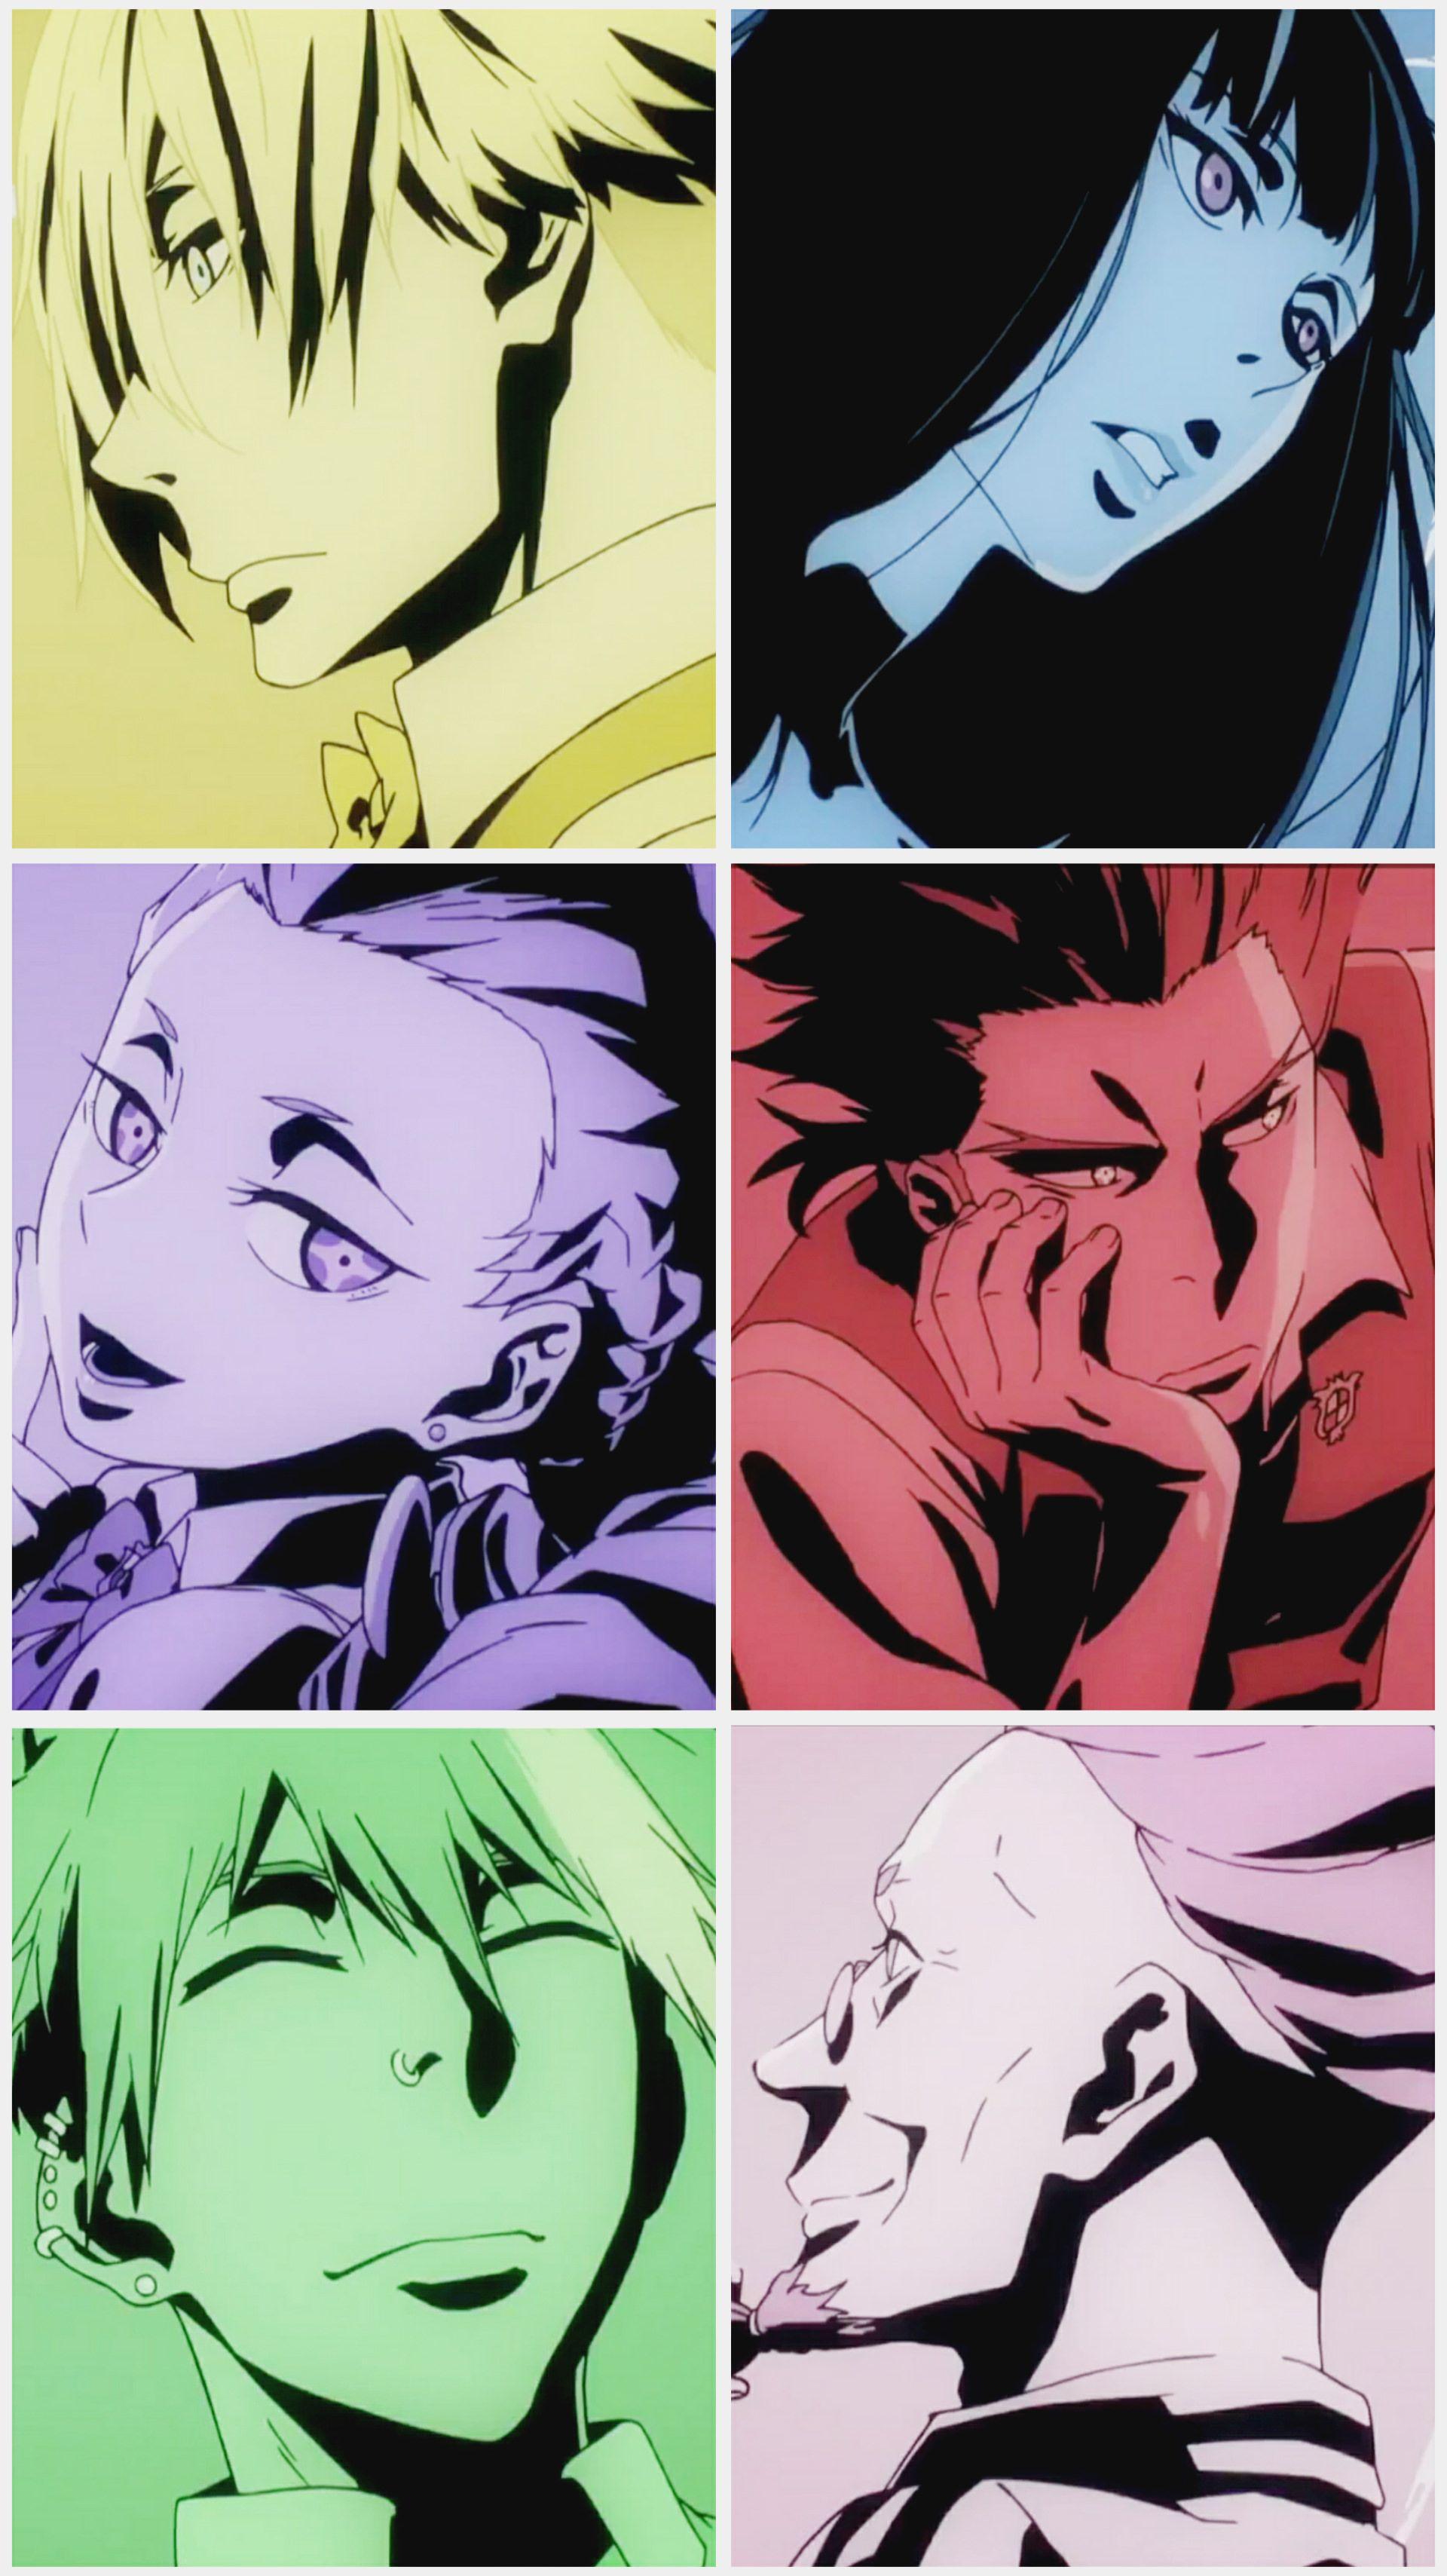 100+] Death Parade Wallpapers